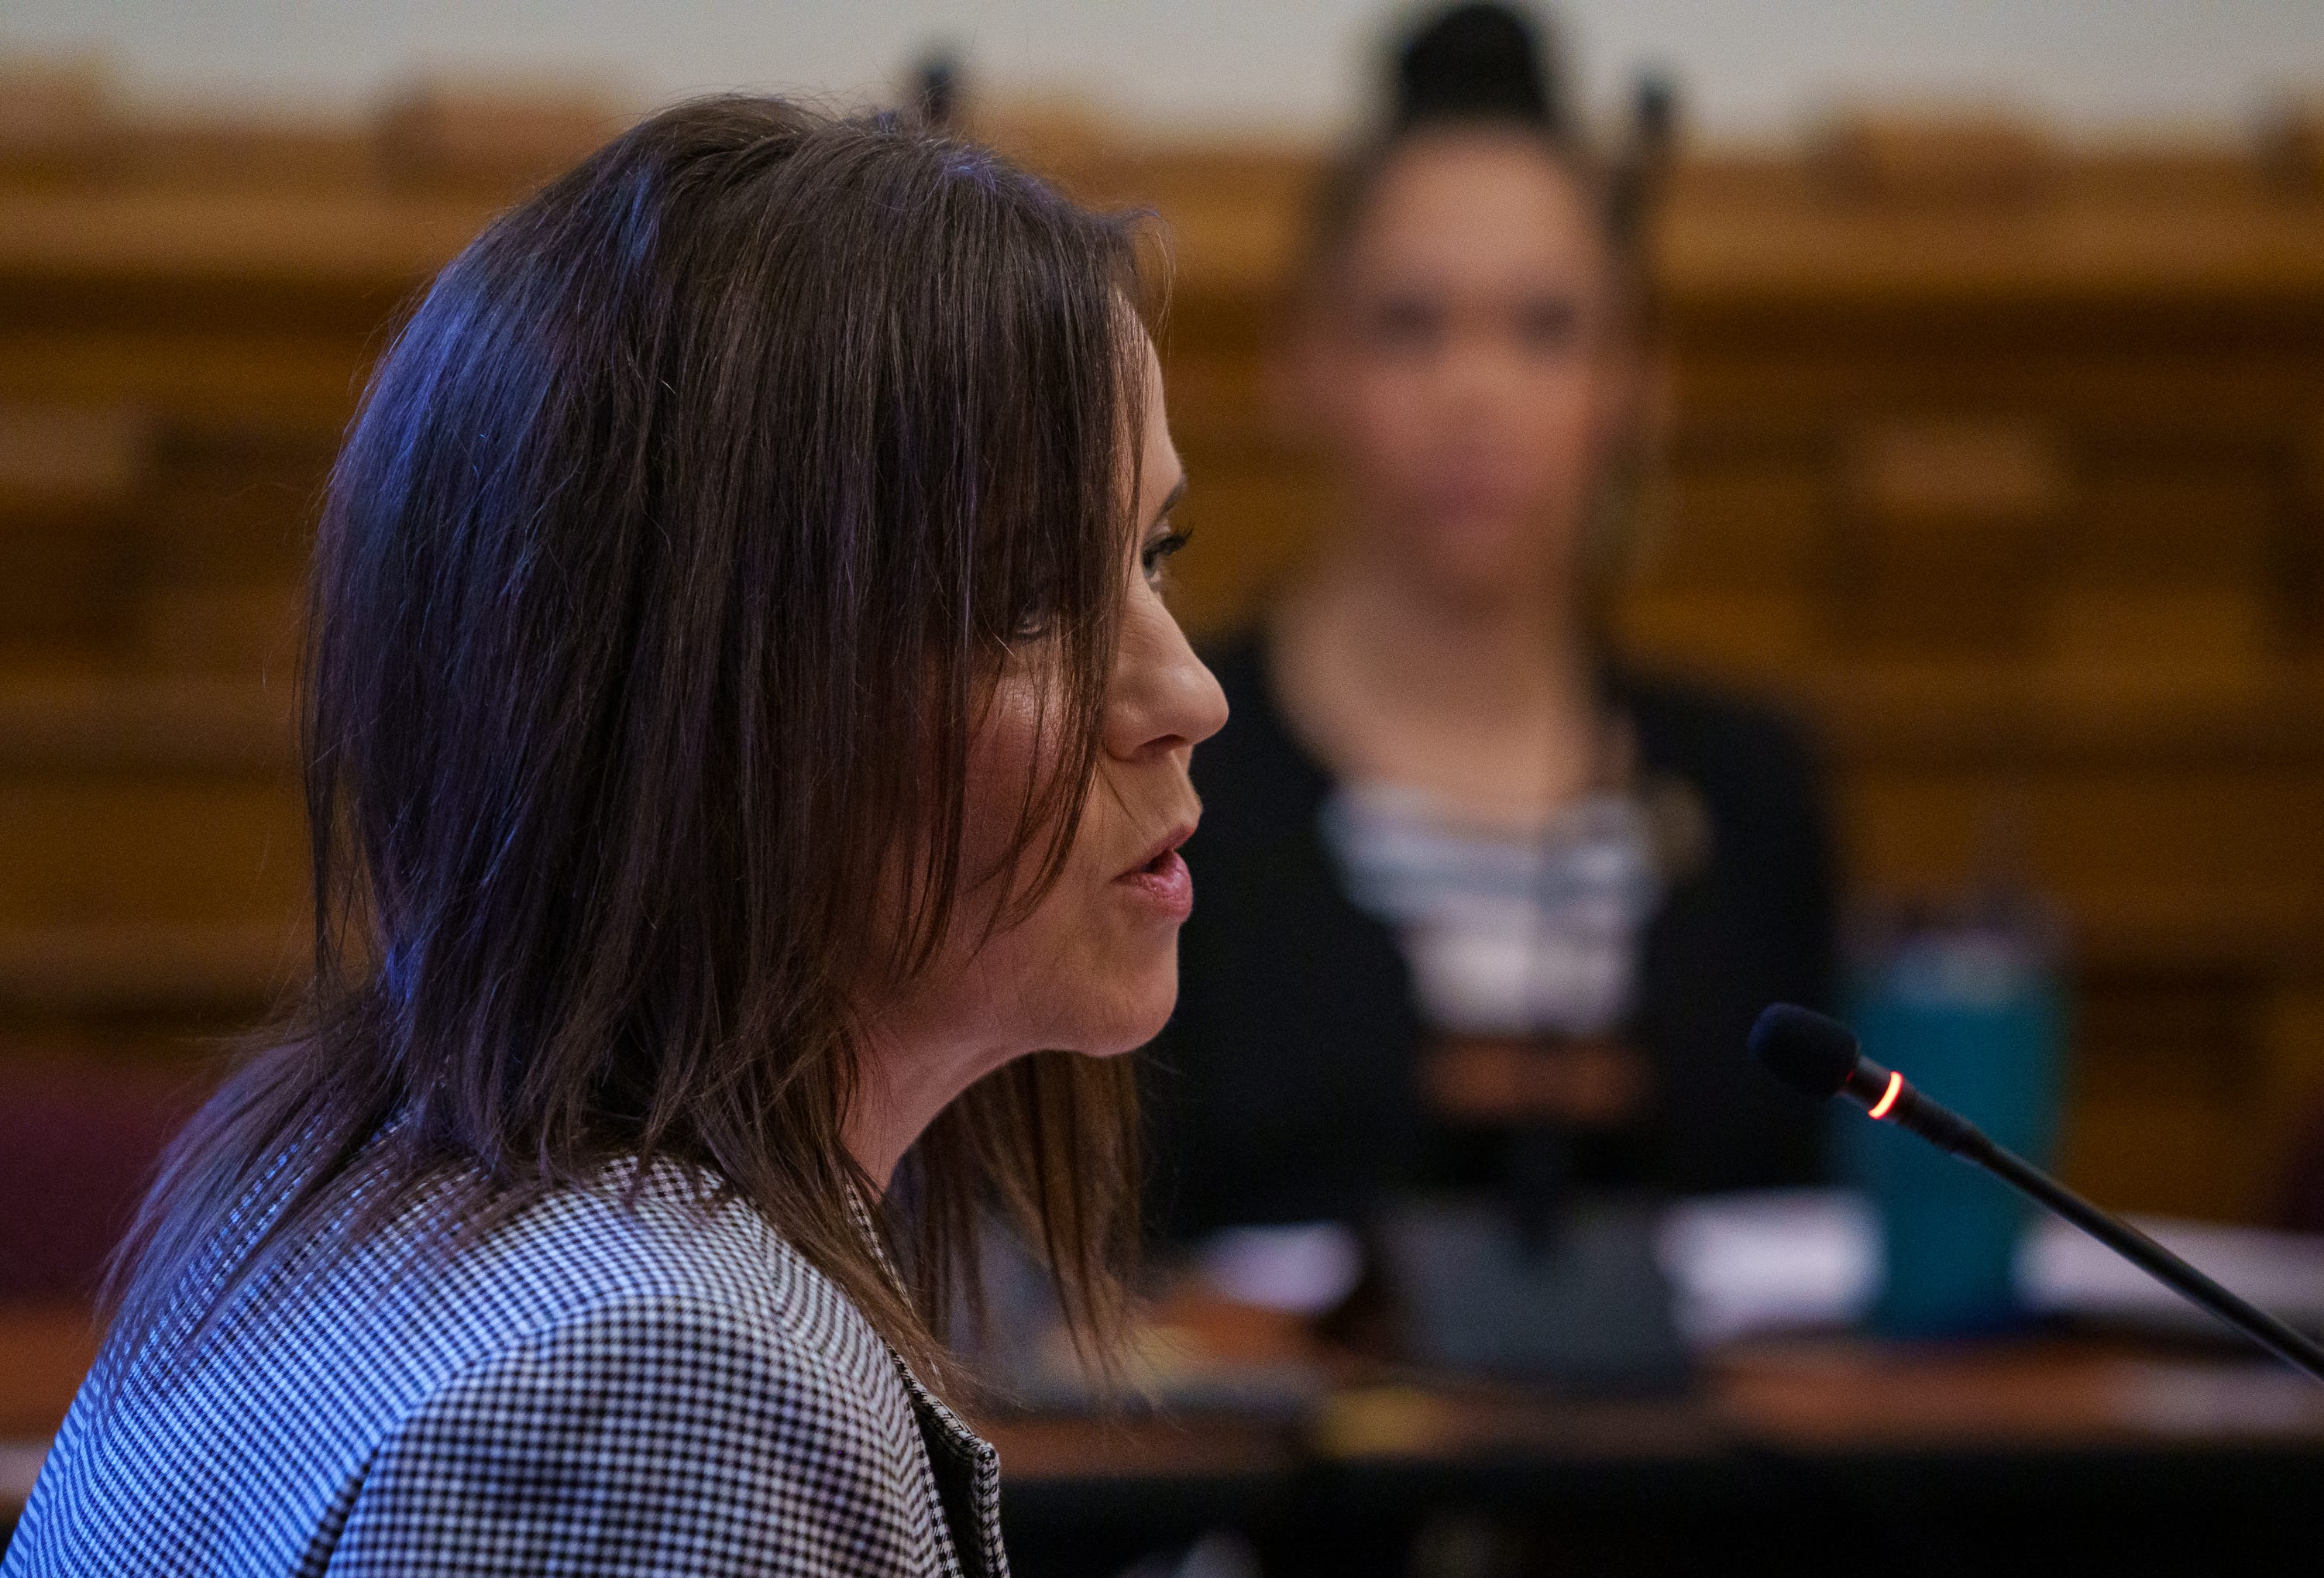 Julie West, of La Porte, Indiana, testifies Monday, Feb. 6, 2023, during a Senate Family and Children Services committee meeting on Senate Bill 369, which requires AEDs on the premise of sporting events. West lost her son, Jake, to sudden cardiac arrest in 2013.